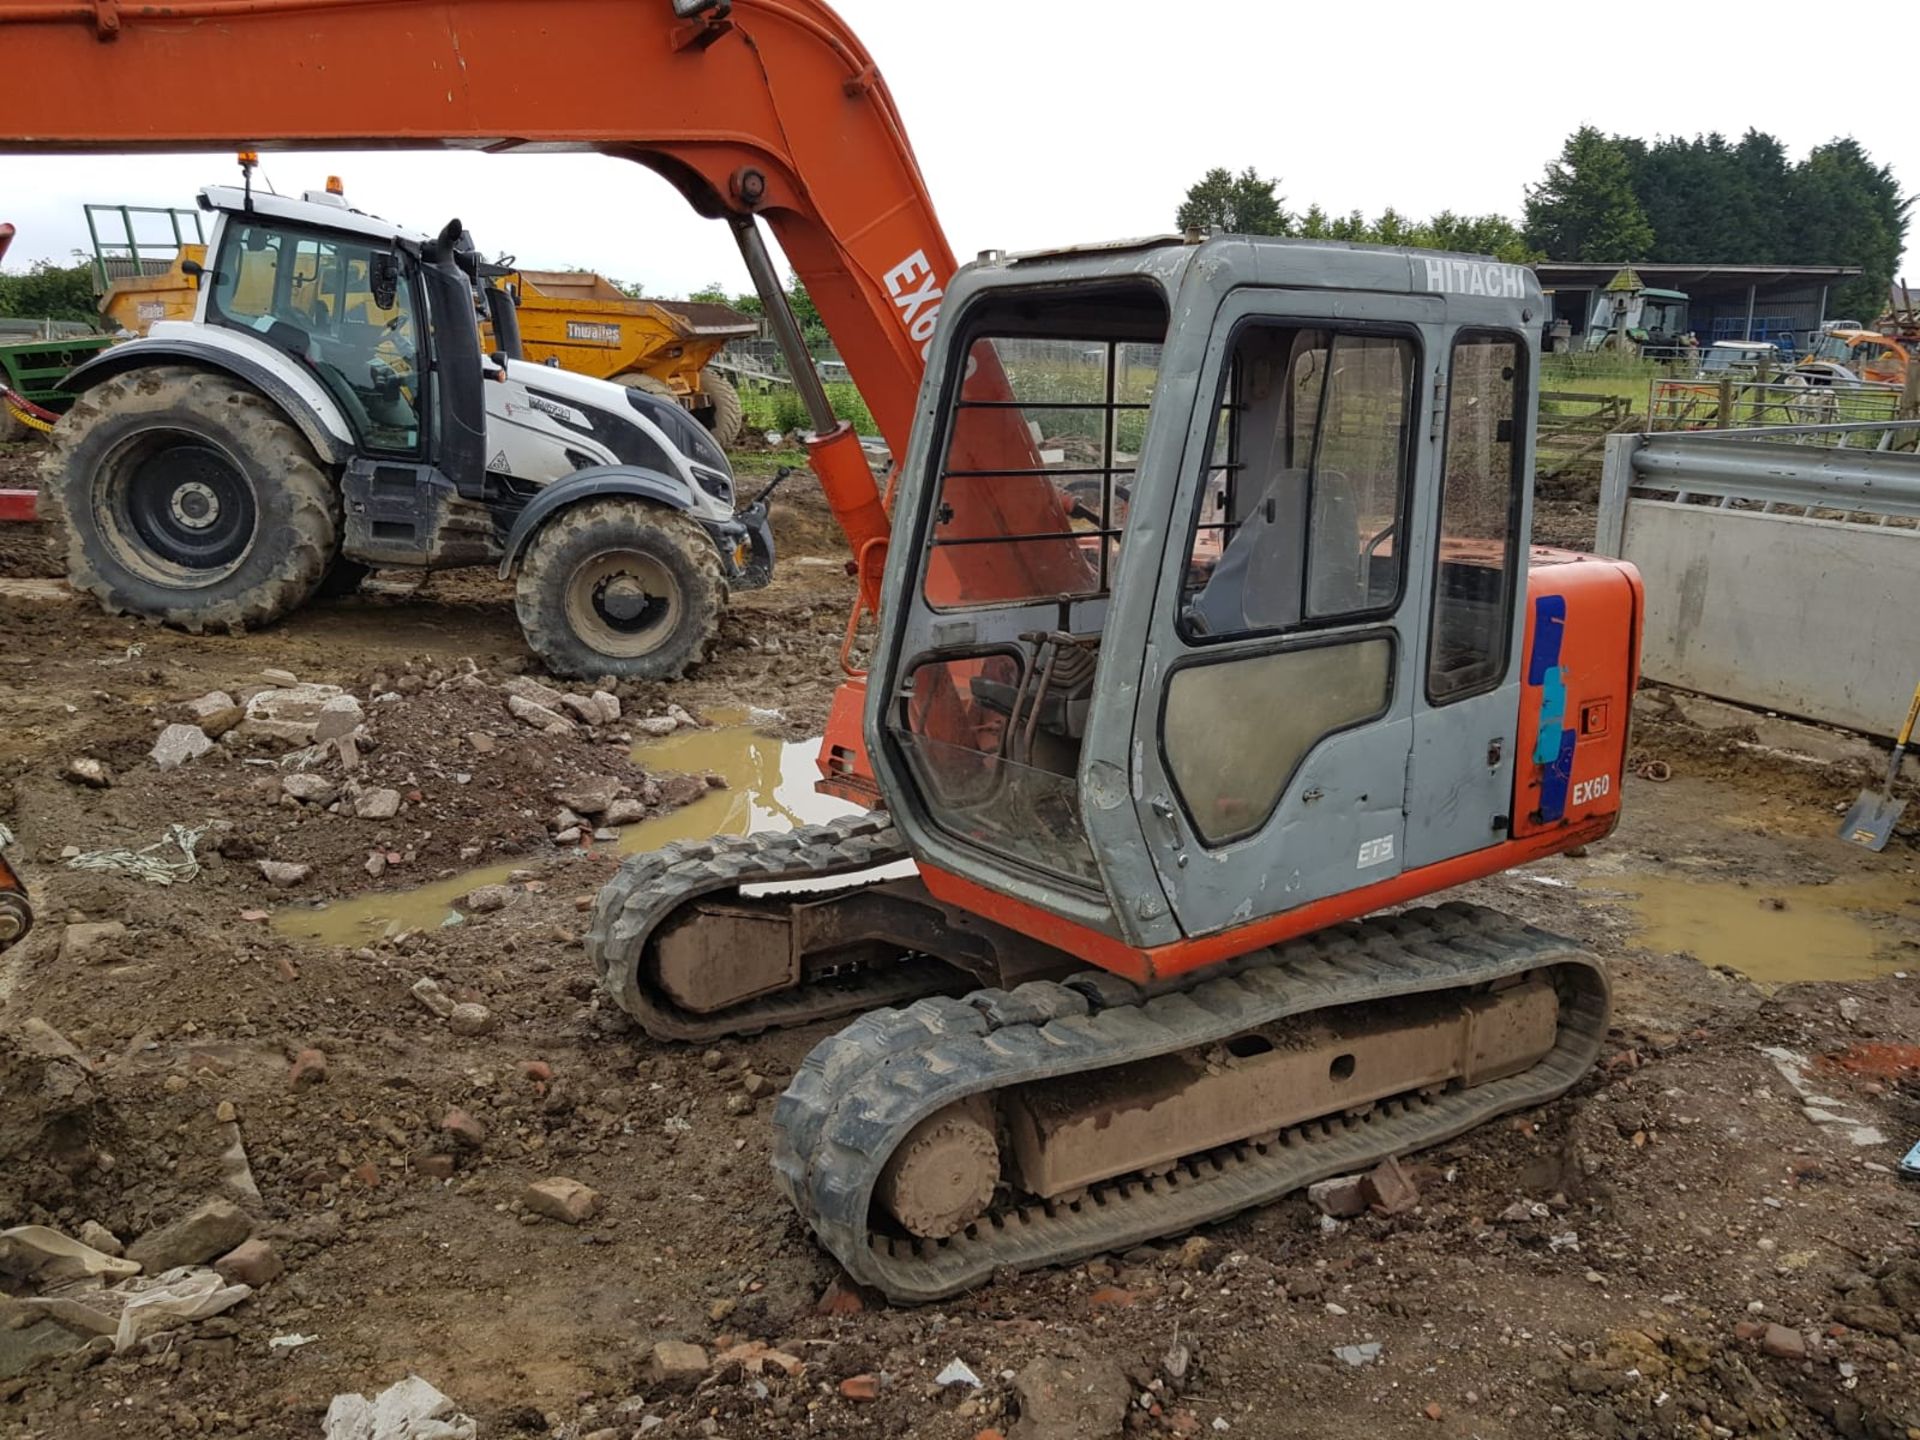 HITATCHI EX 60.2 TRACKED DIGGER / EXCAVATOR, STARTS, DRIVES AND DIGS *PLUS VAT* - Image 2 of 6